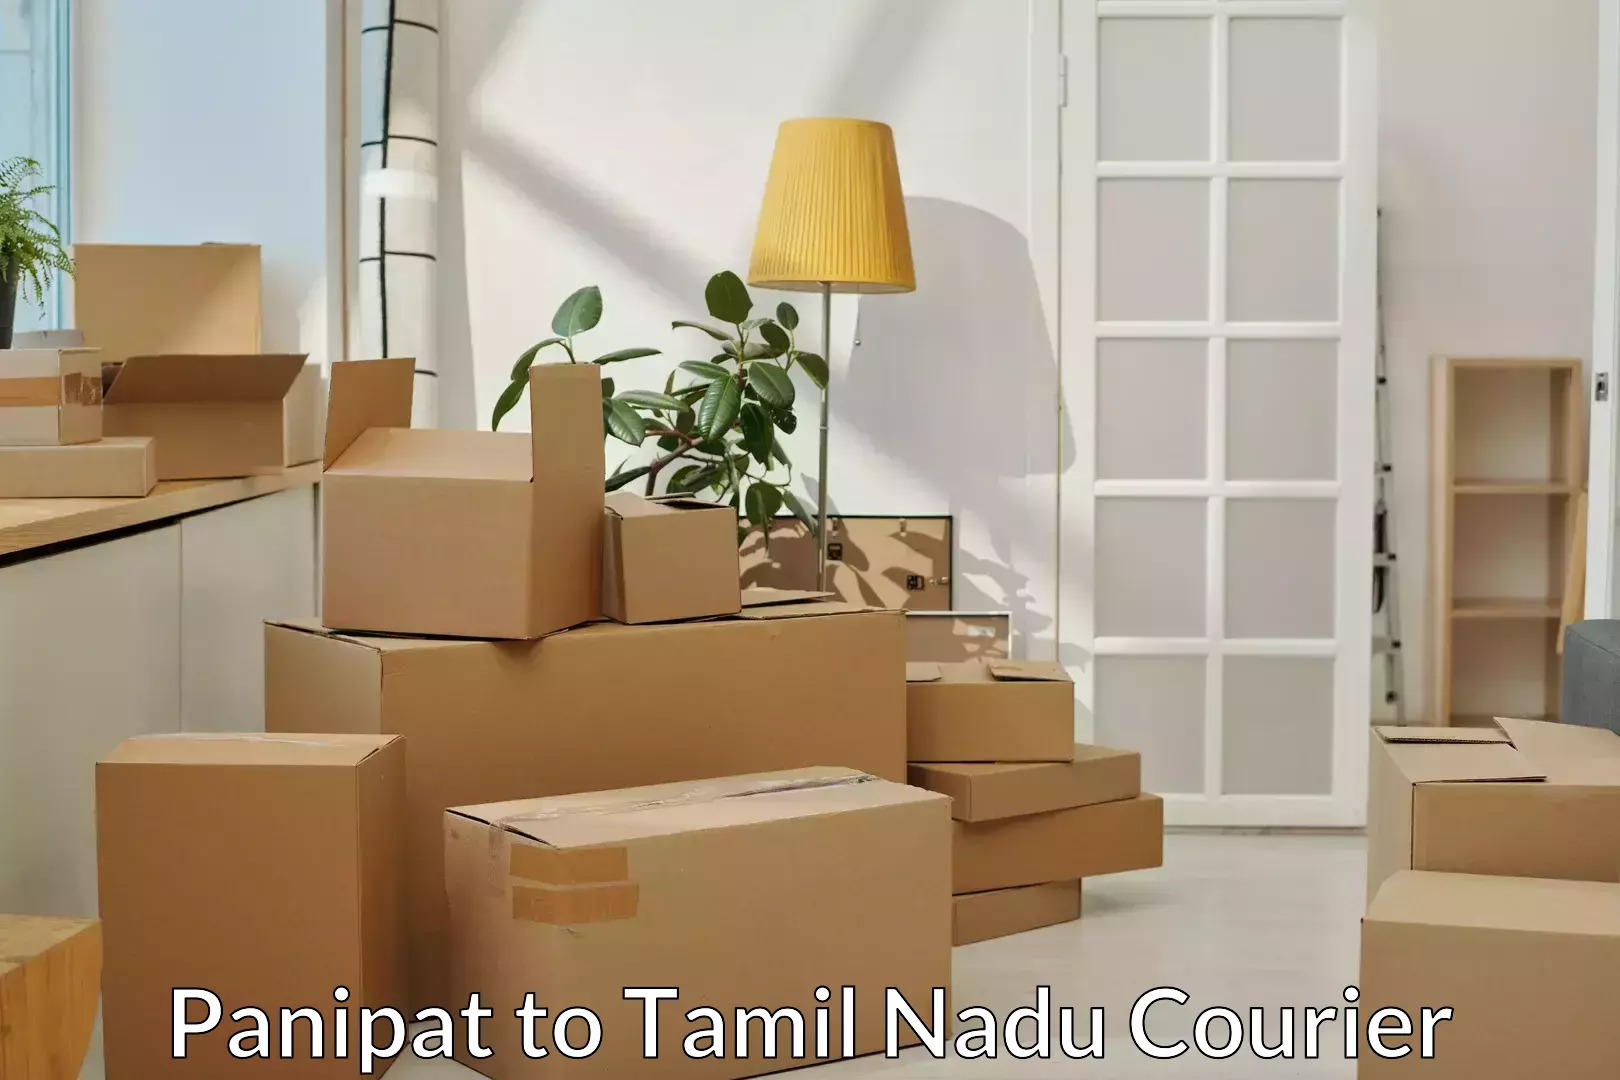 Trusted moving company Panipat to Sirkali